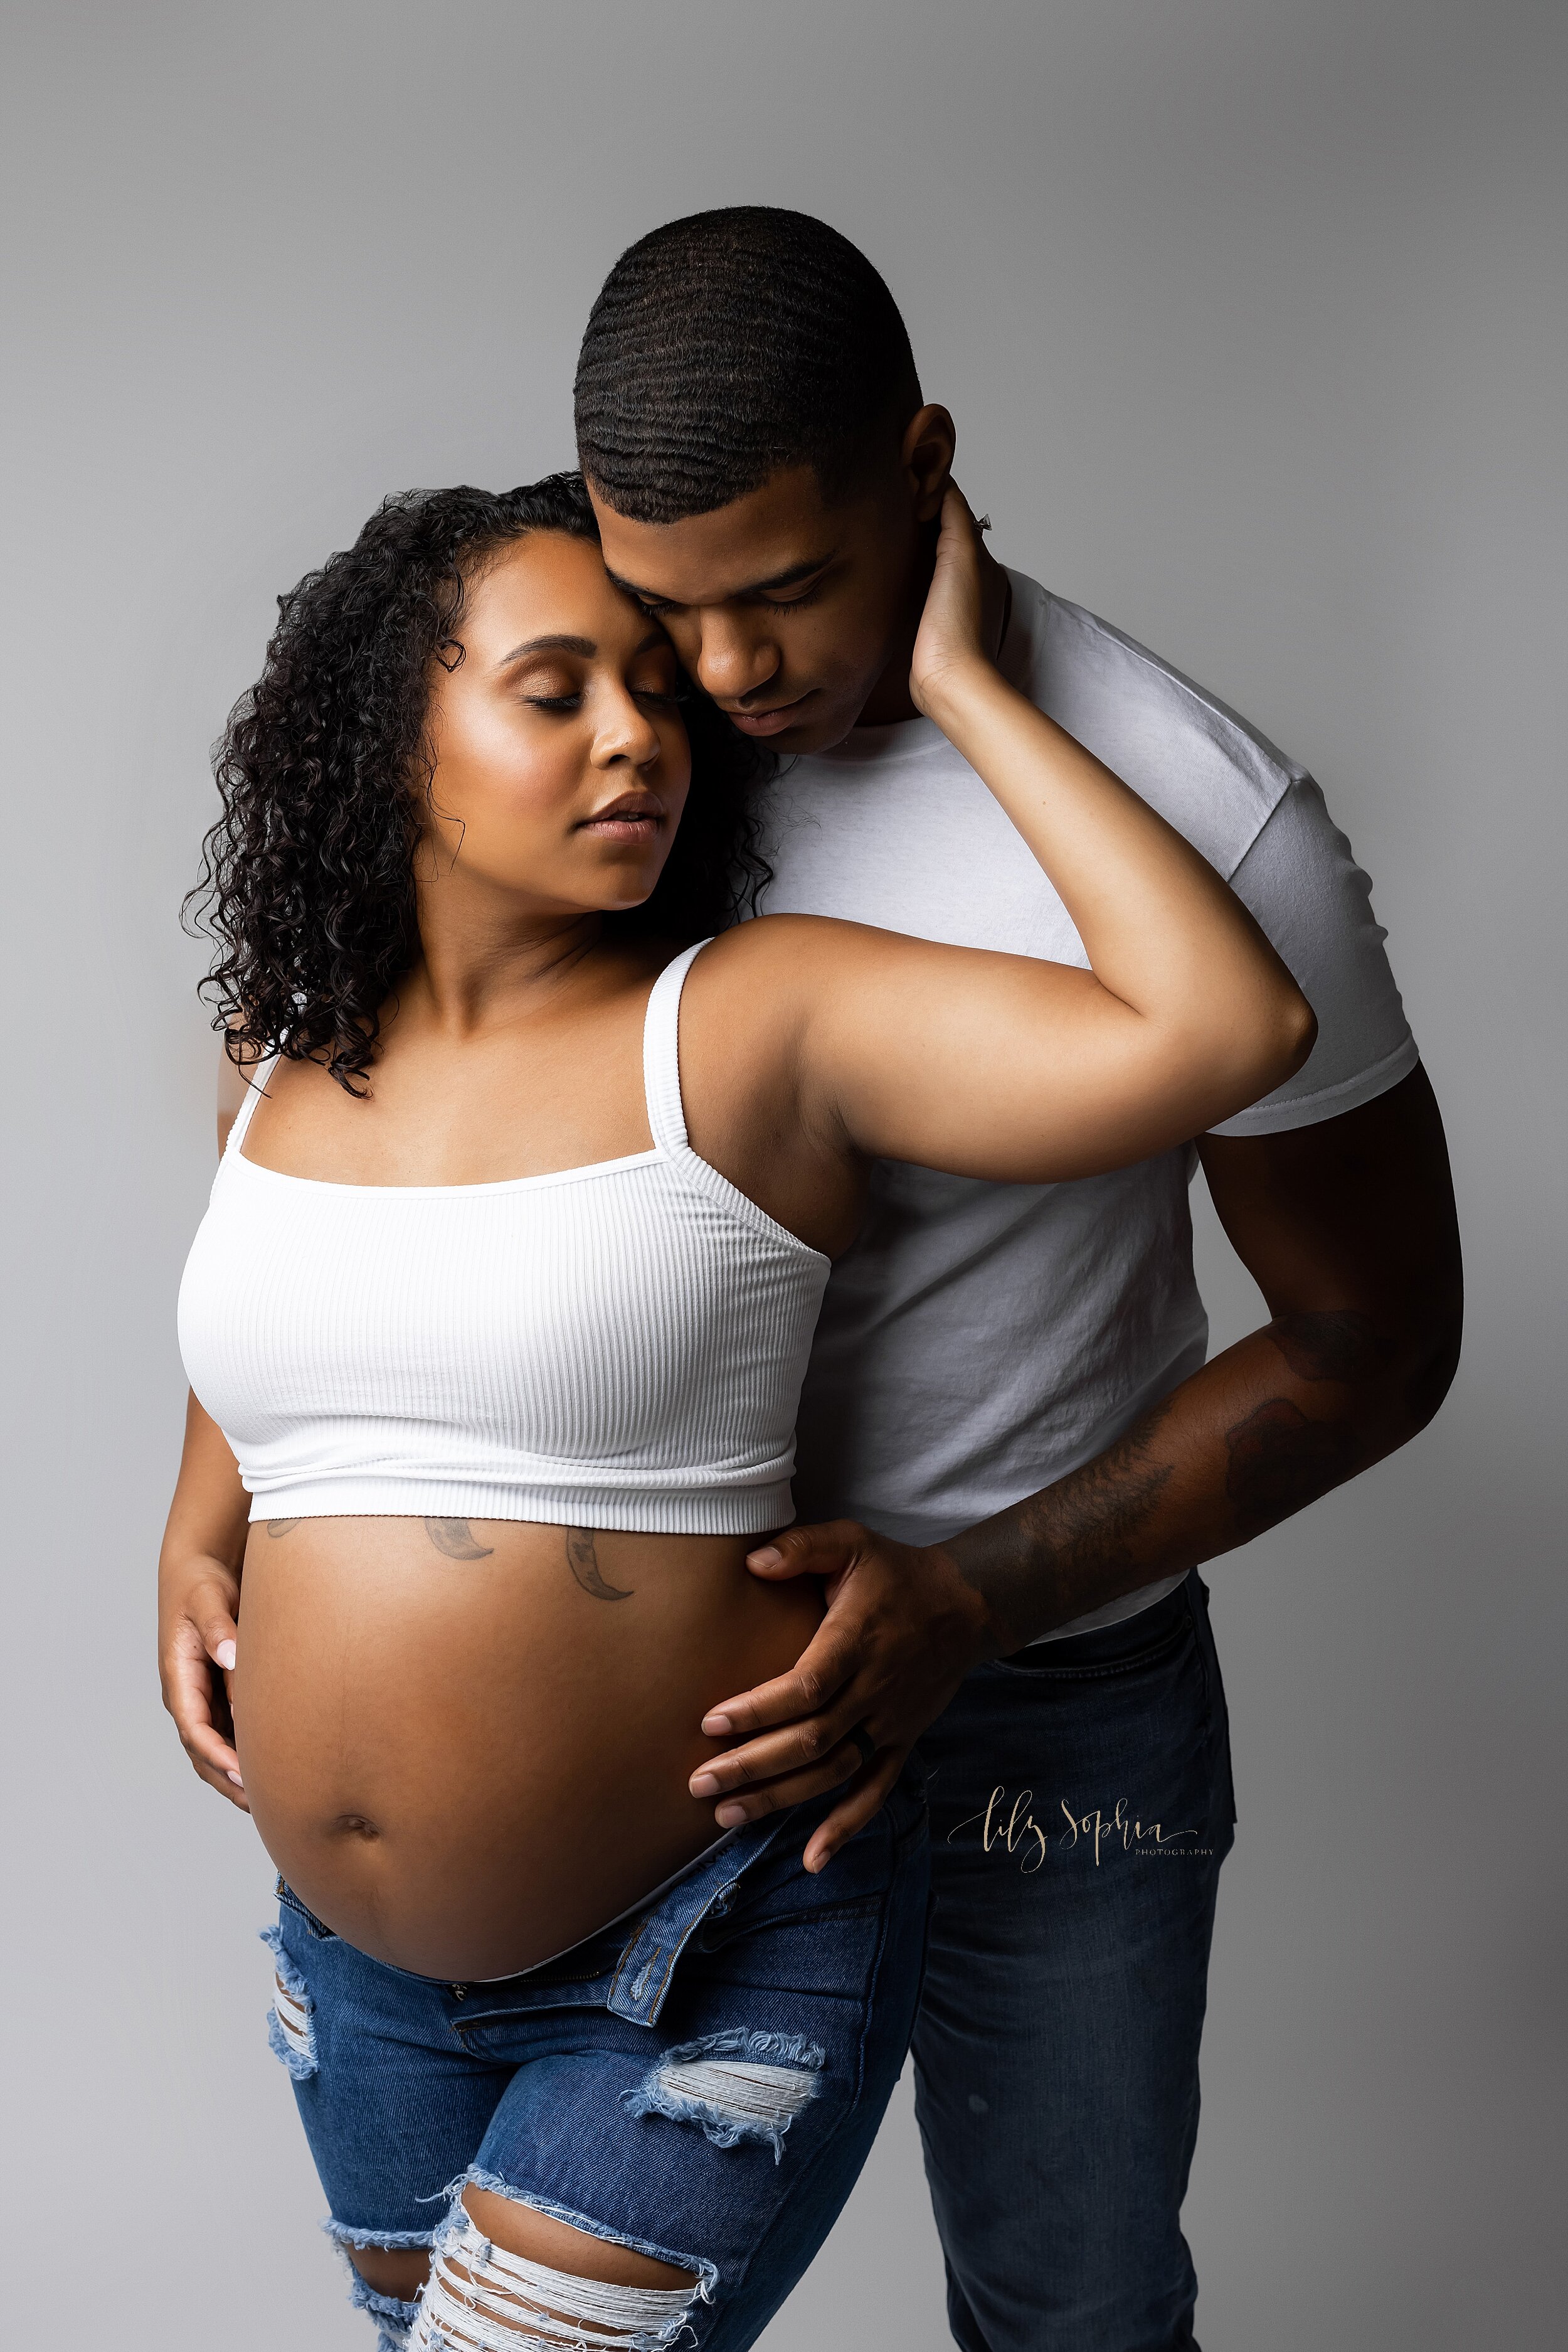  Modern studio portrait of a black expectant couple in Atlanta, Georgia.  The mother caresses her partner’s face as he gently holds her pregnant belly.  